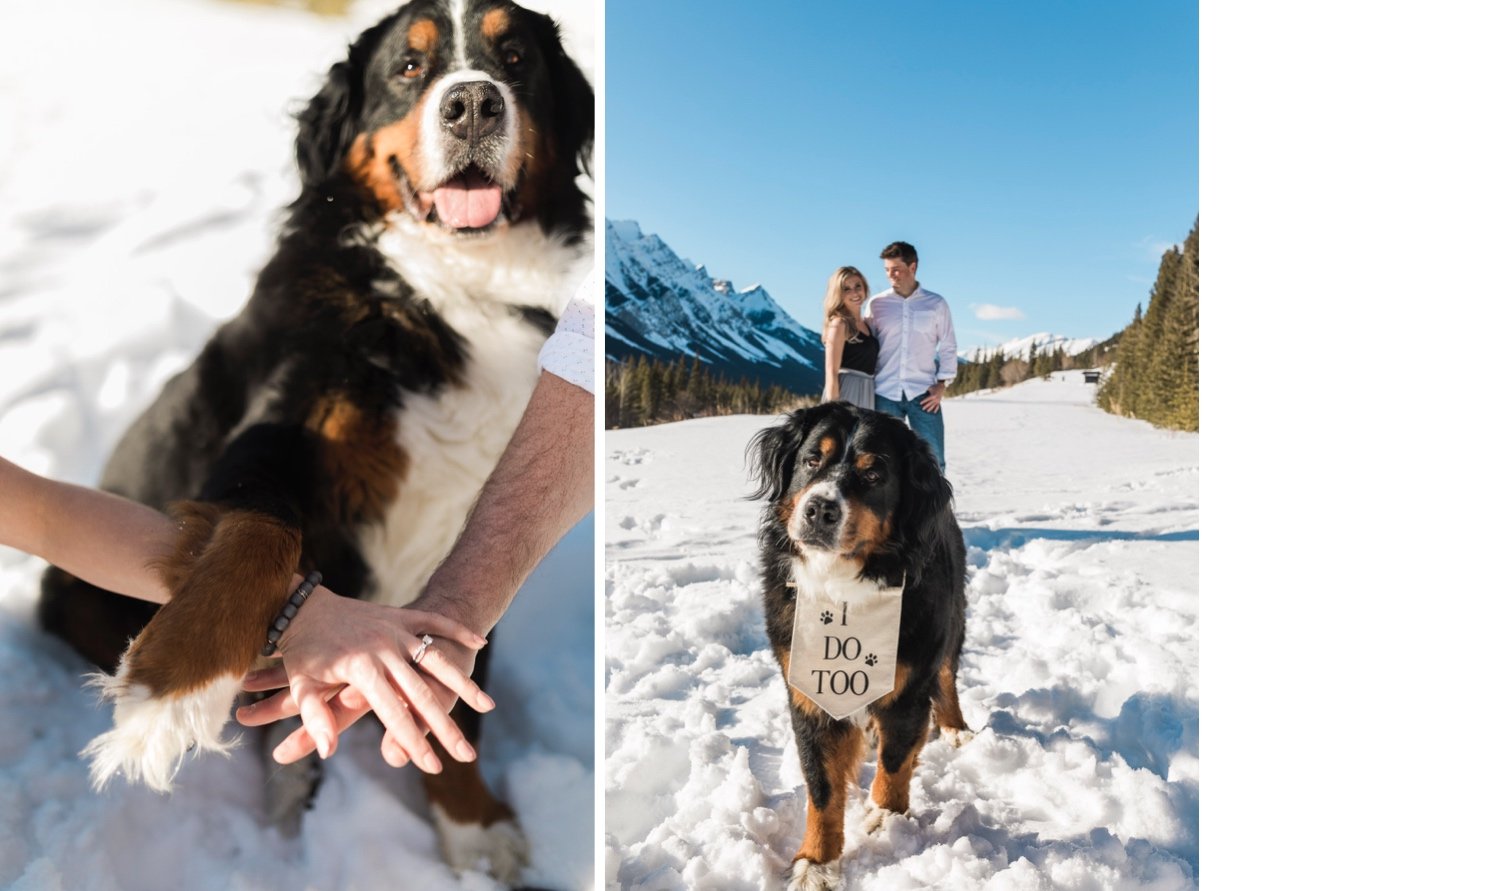 19_sunlight_landscape_Kananaskis_Canmore_Banff_trees_couple_engagement_close_simple_dog_cuddle_kiss_golden_hour_intimate_nature_mountains_fiancee_spring_winter_delicate_ice_bride_snow_soft_Calgary_Alberta_photographer_forest_groom_outdoor.jpg